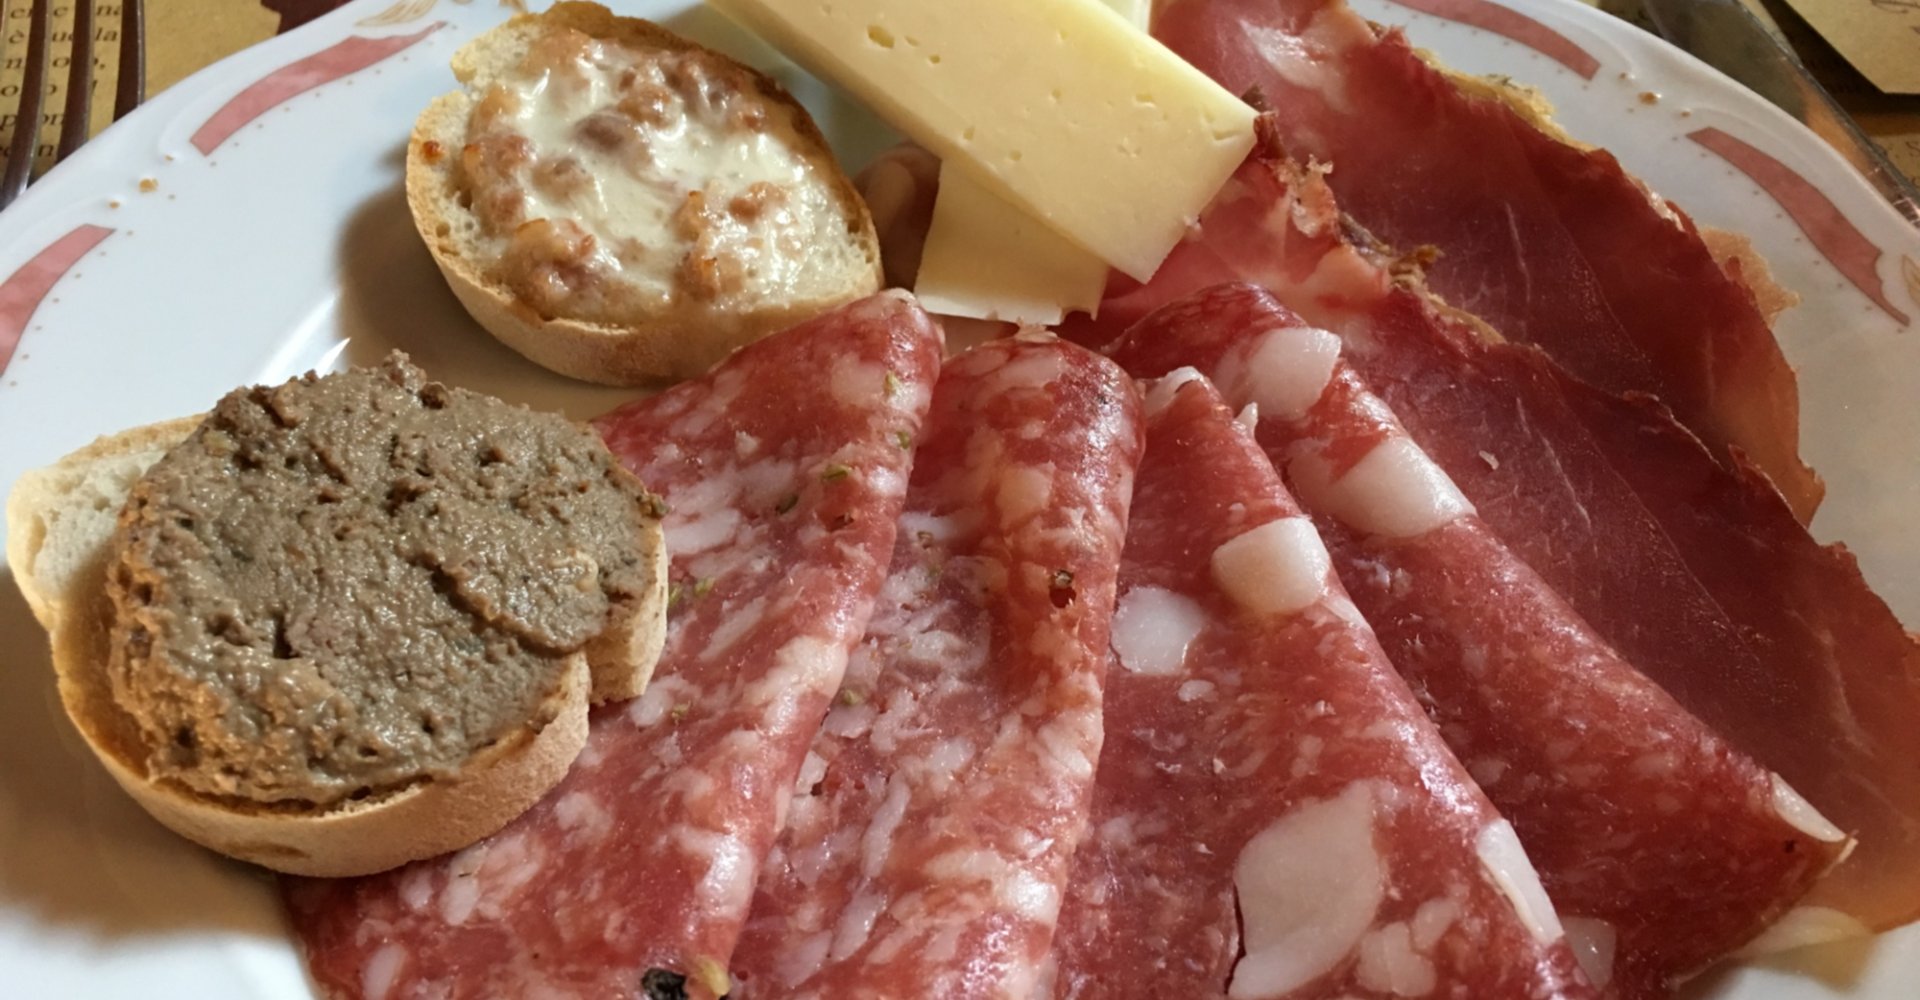 Appetizer with crostini and tuscan salami